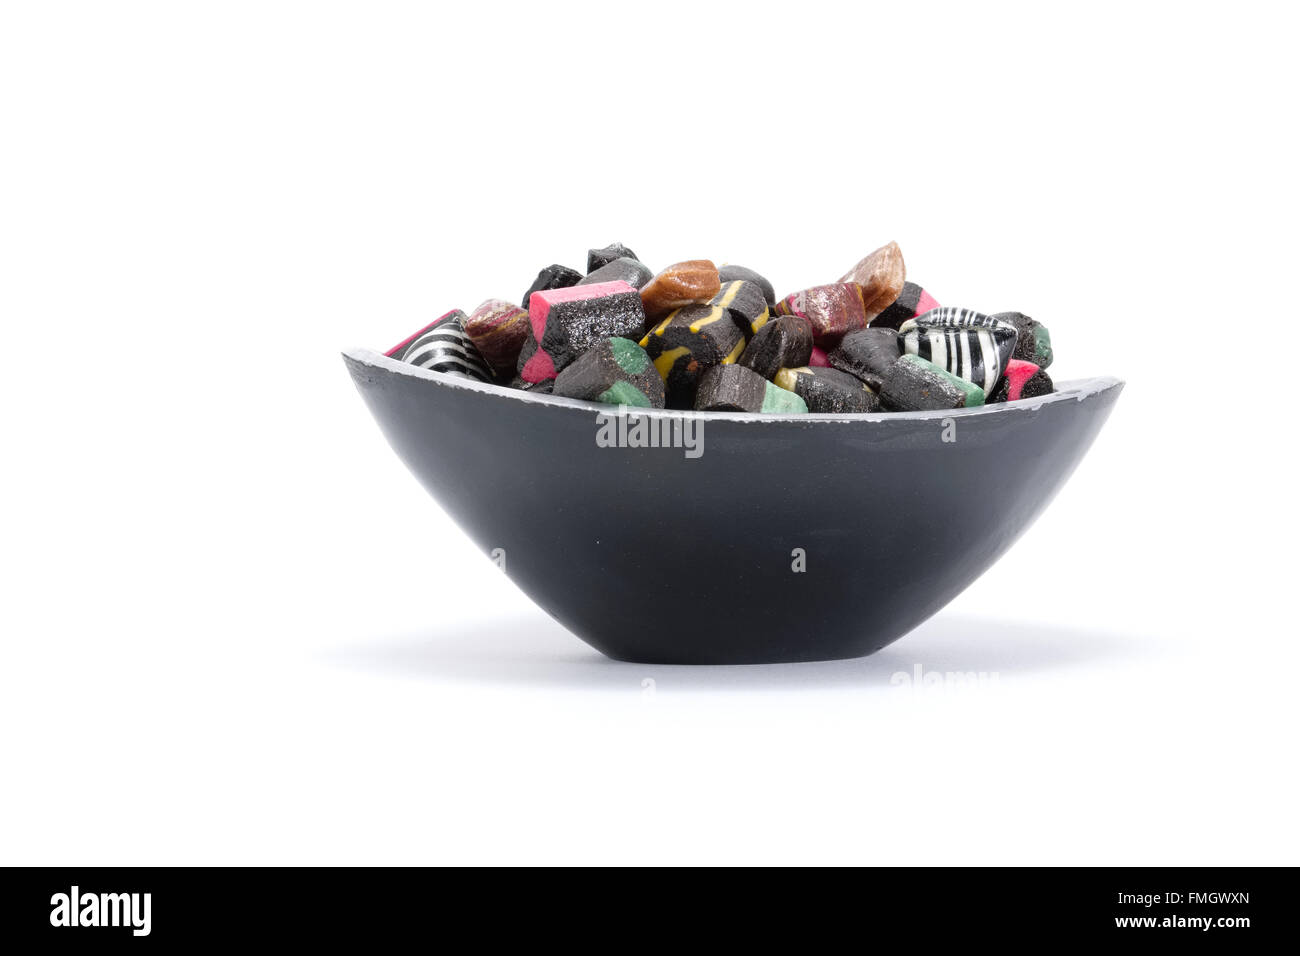 Candy bowl filled with candy seen from the side Stock Photo